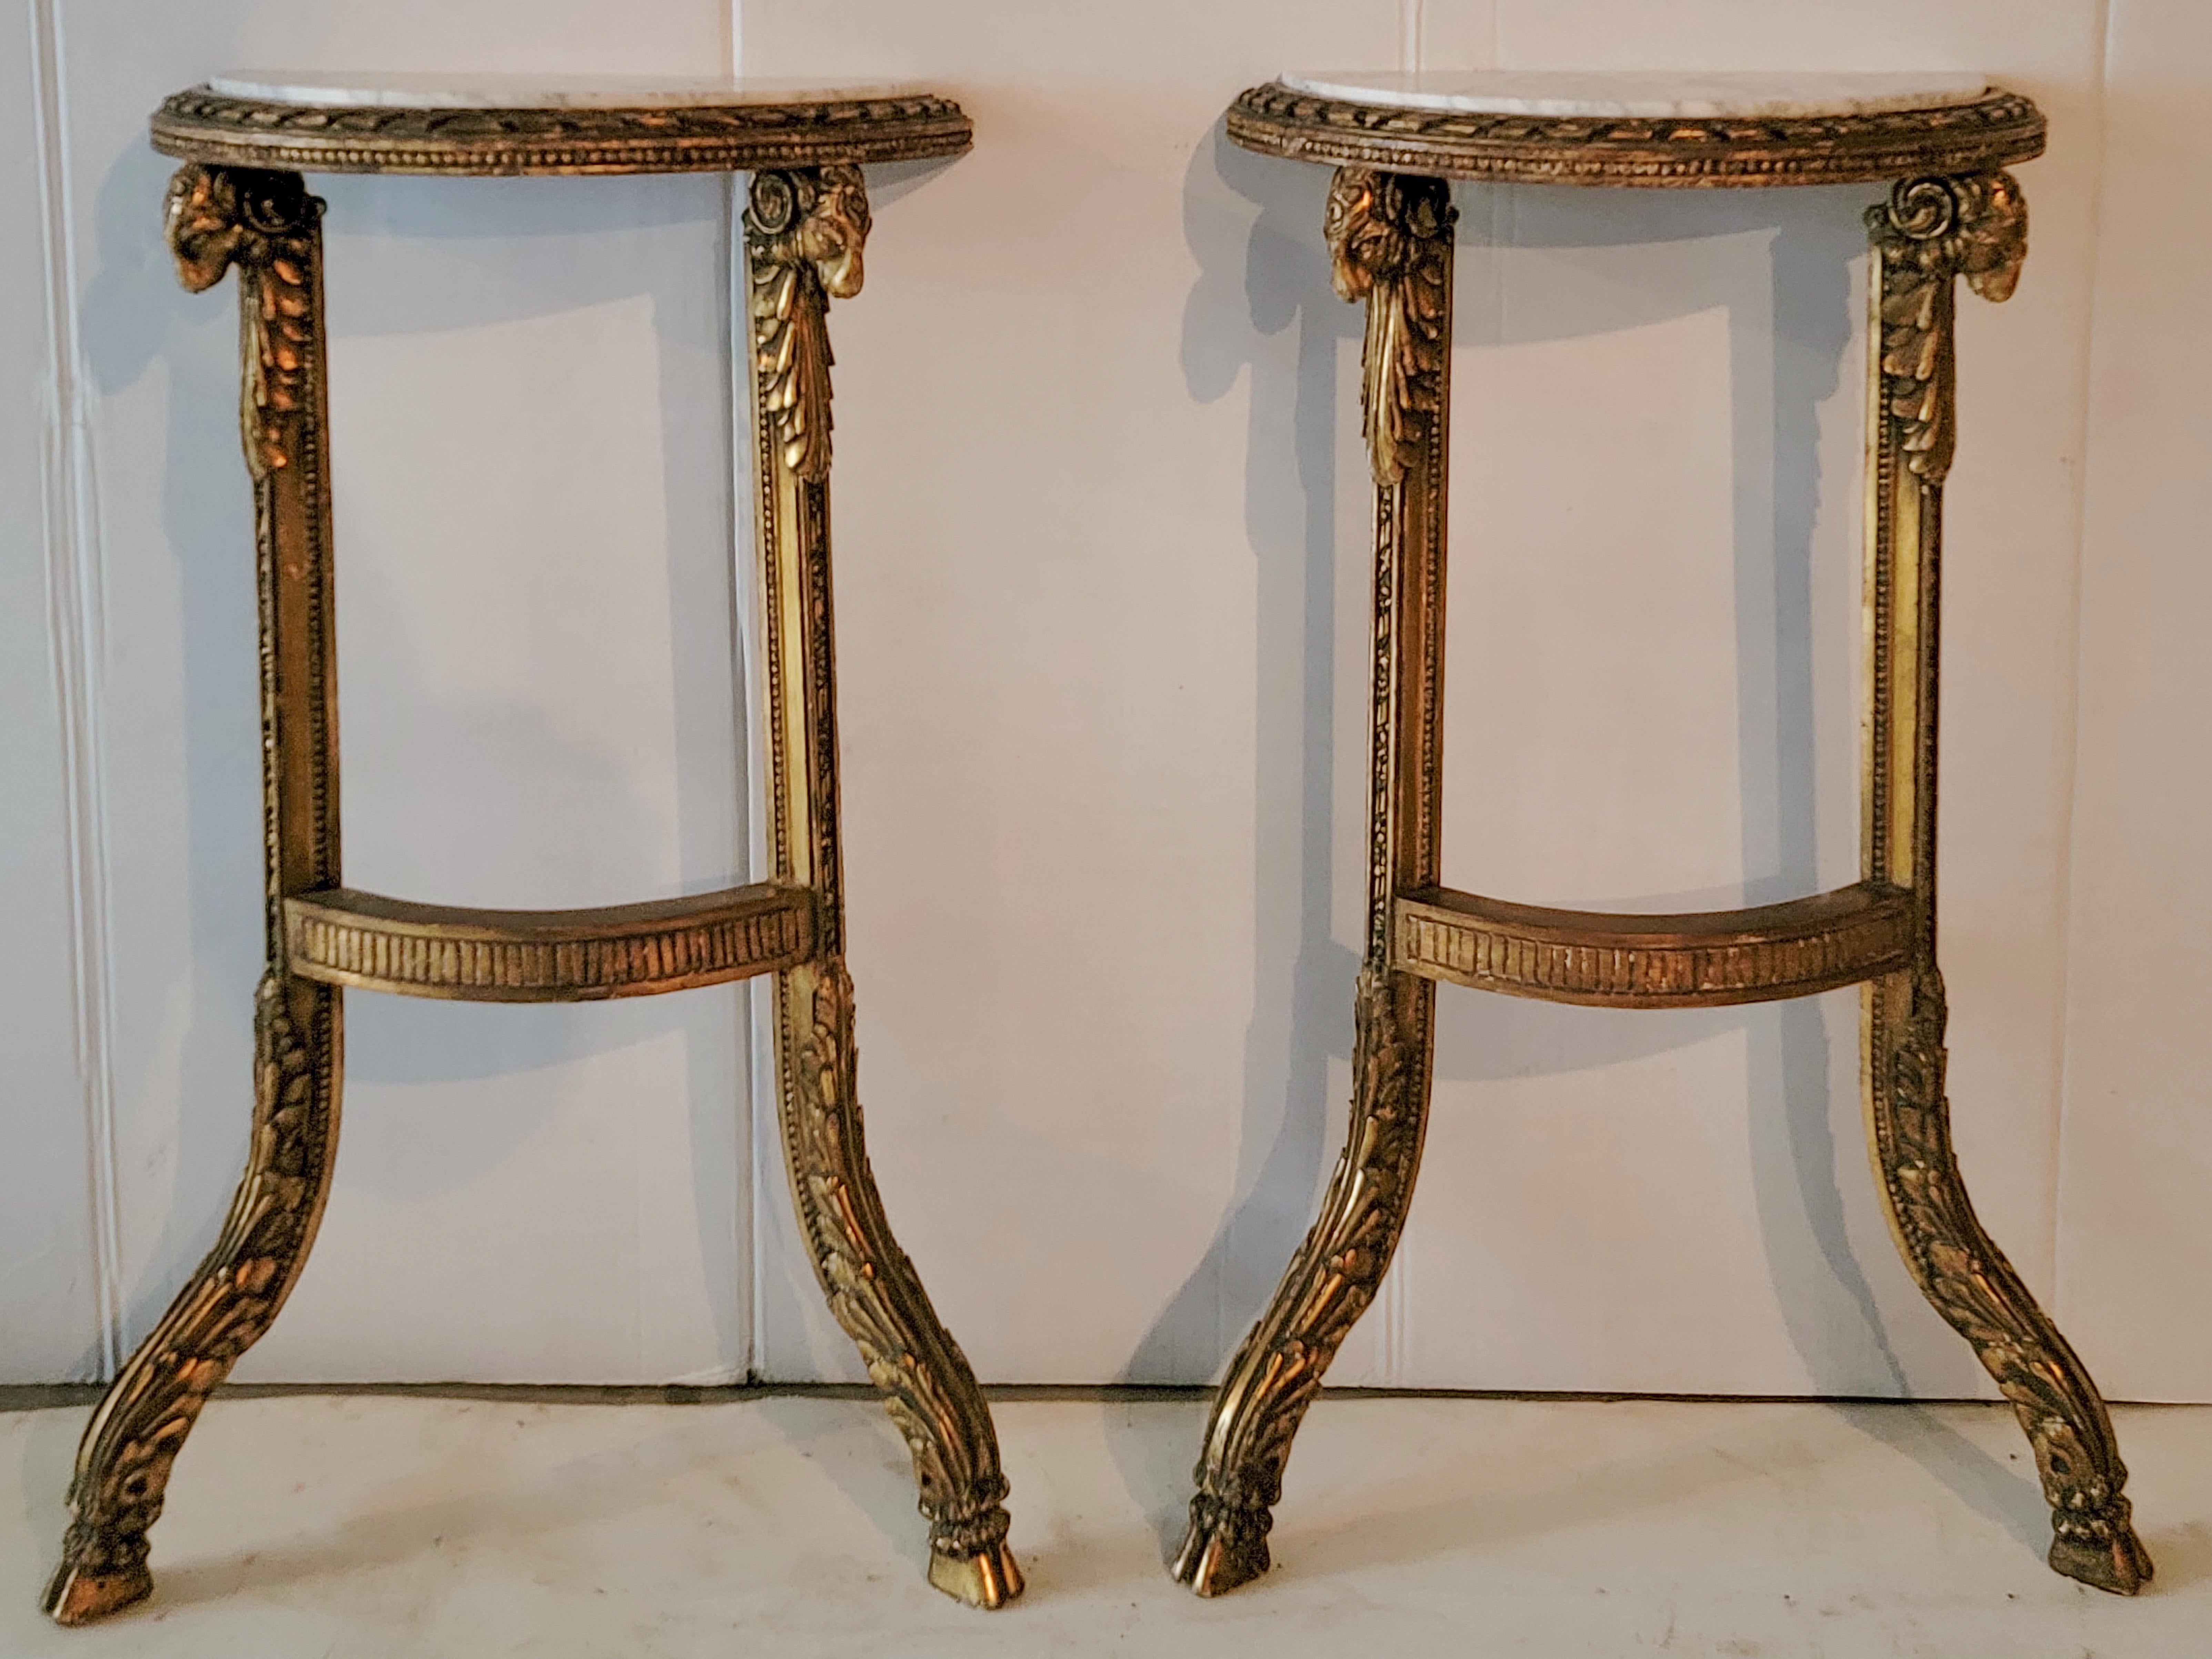 This is a pair of petite 19th century French carved ram marble top console tables. The marble is white with veining. The feet are hairy hooves. They are intended to be wall mounted.